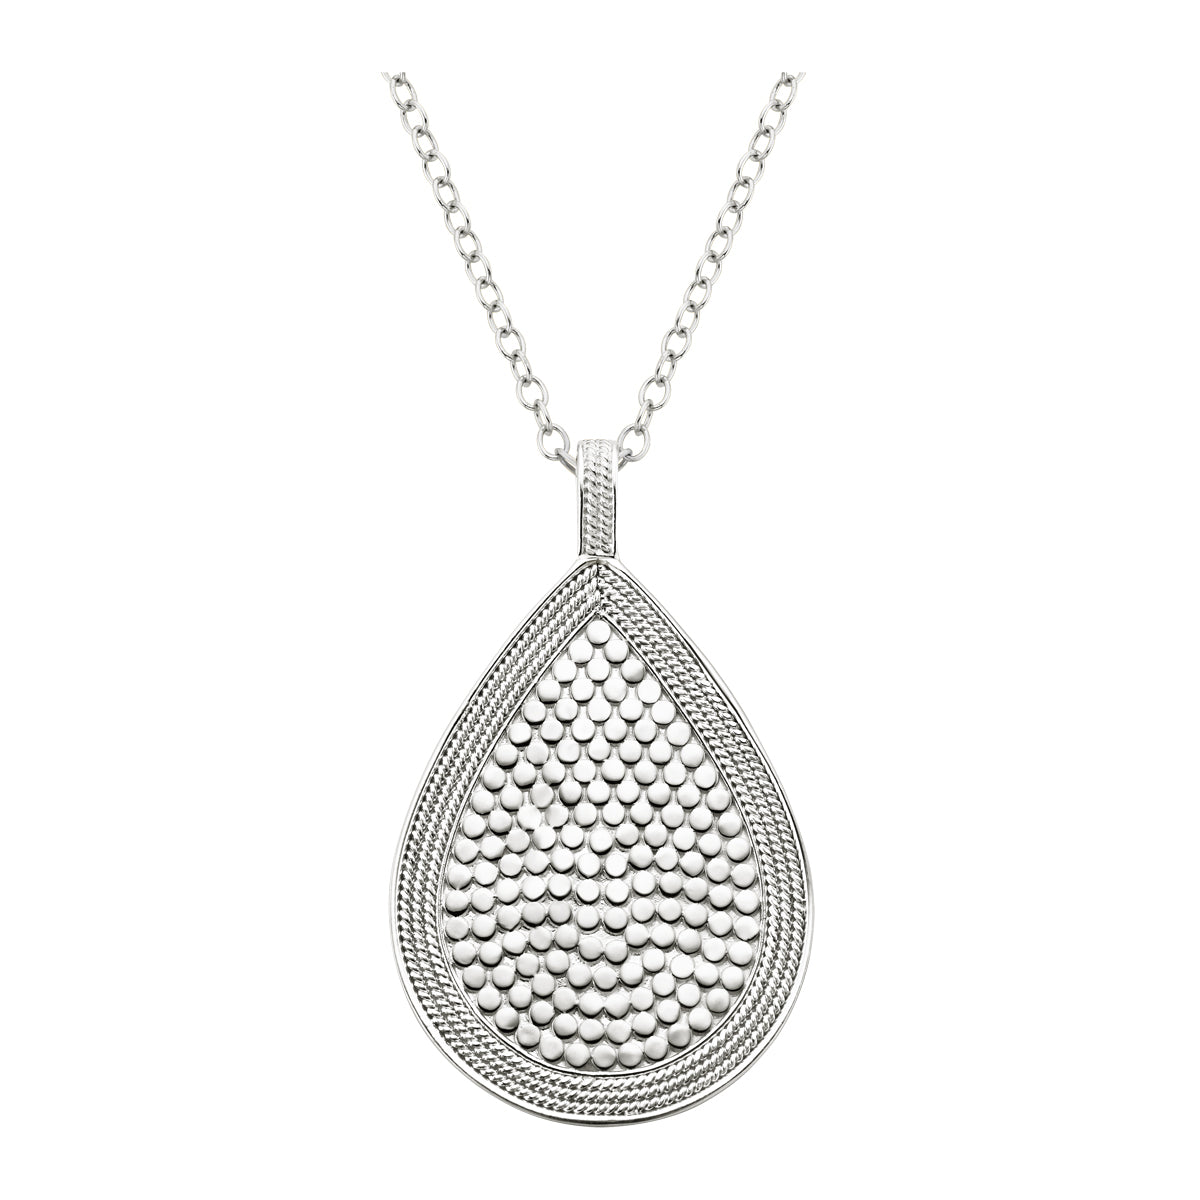 Reversible Large teardrop necklace in mixed metals